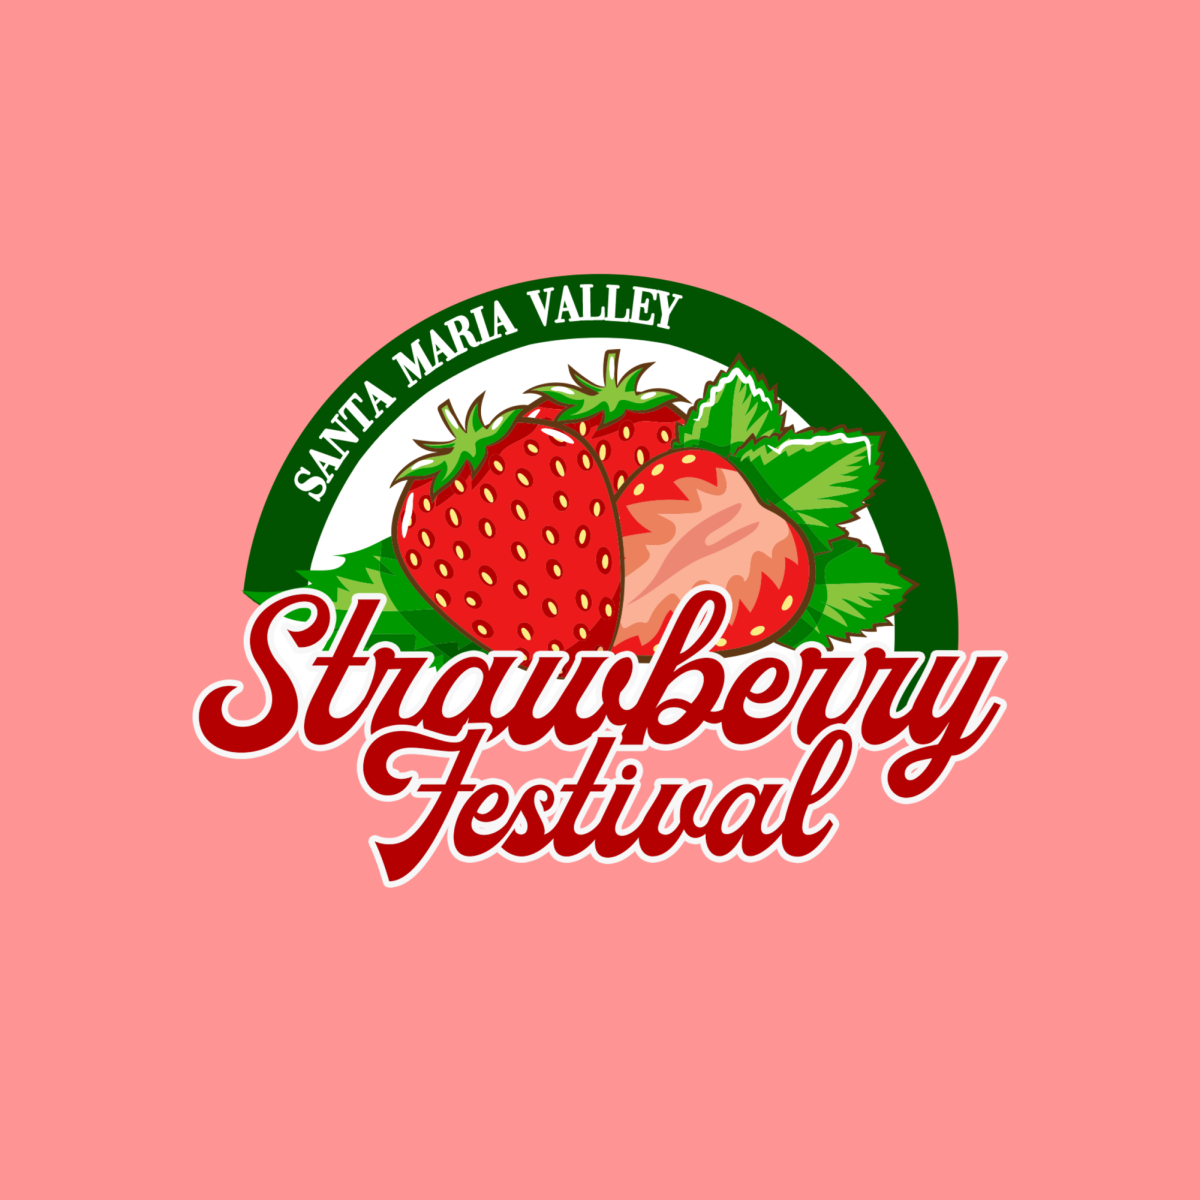 My First Time At The Santa Maria Strawberry Festival